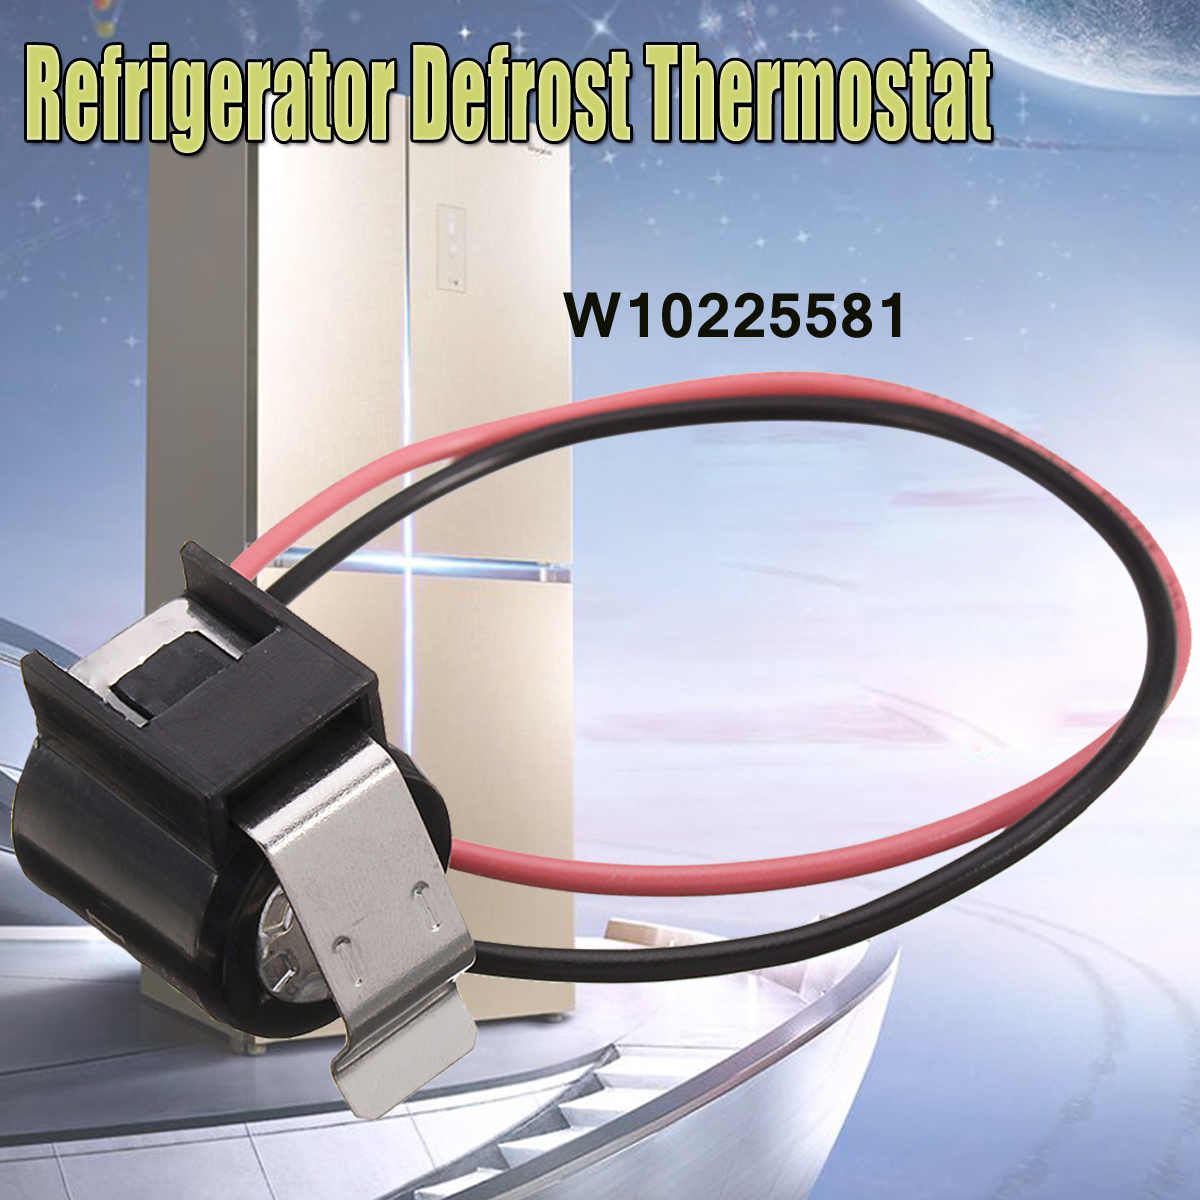 Refrigerator-Defrost-Thermostat-Replacement-For-Whirlpool-Kenmore-W10225581-1364764-1